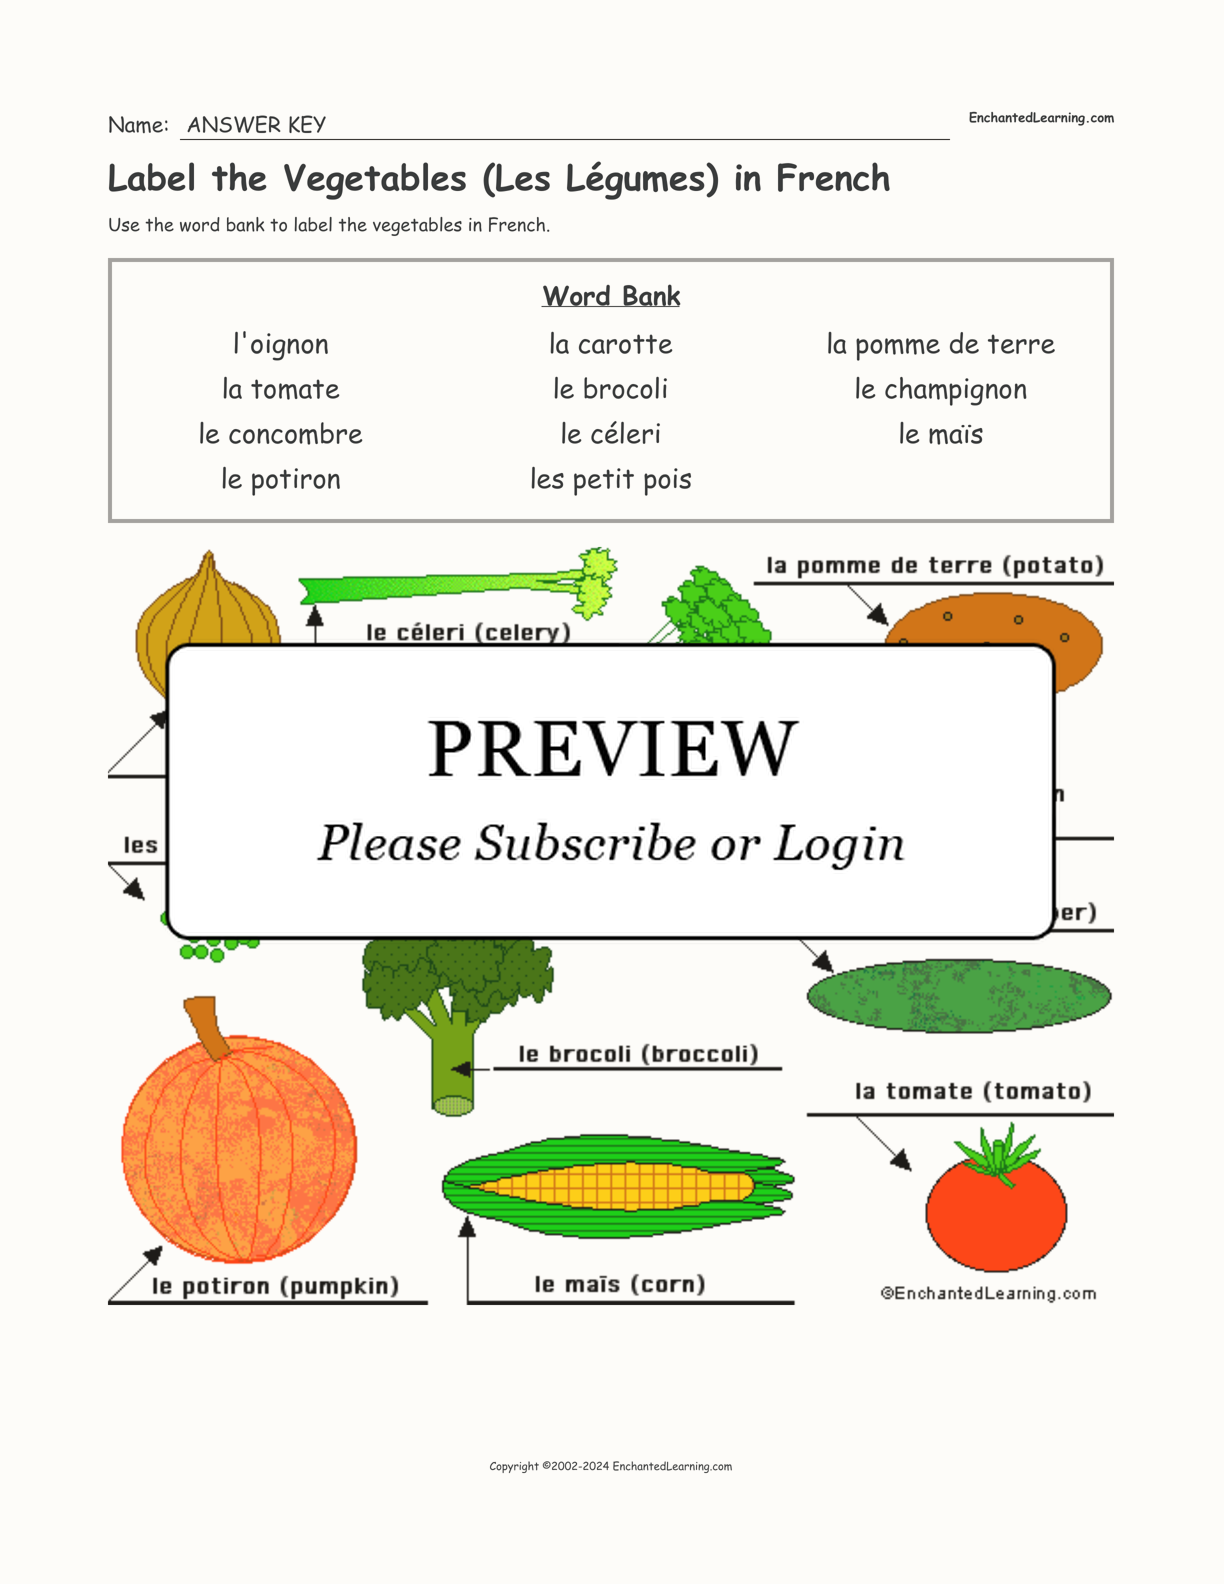 Label the Vegetables (Les Légumes) in French interactive worksheet page 2